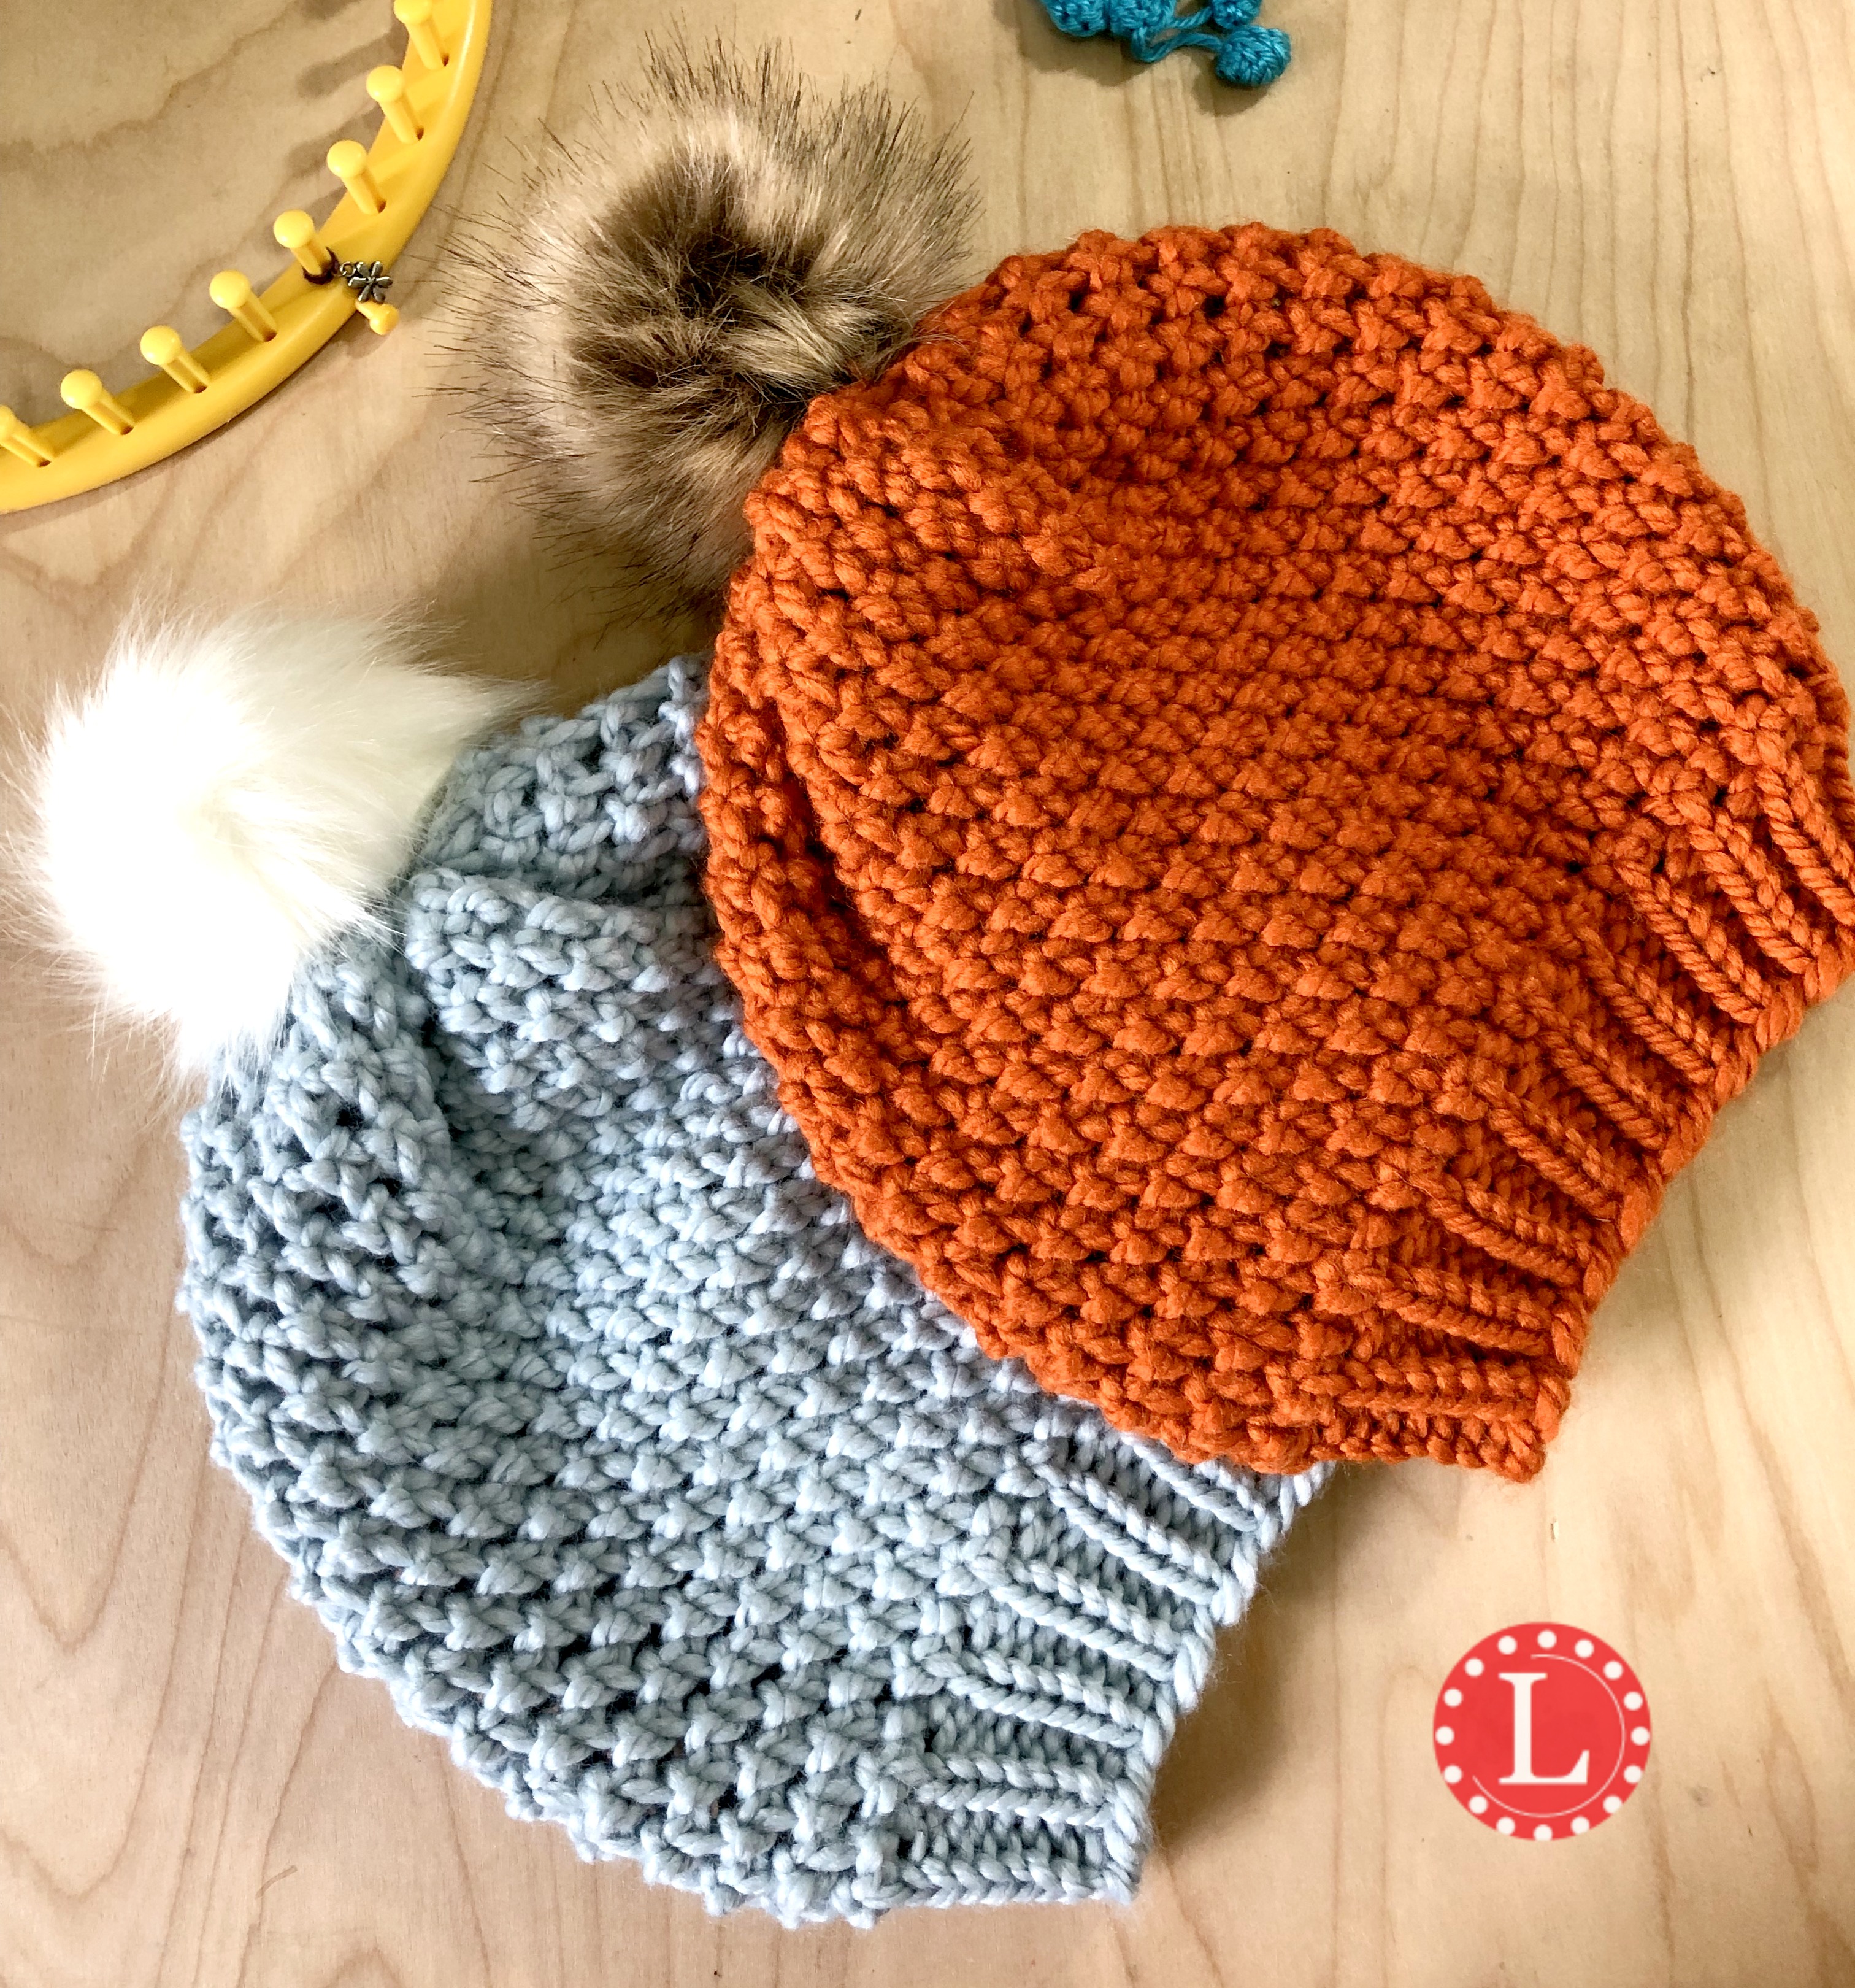 Loom Knitting PATTERNS Pom Pom Scarf With Step by Step Video Tutorial  Loomahat 